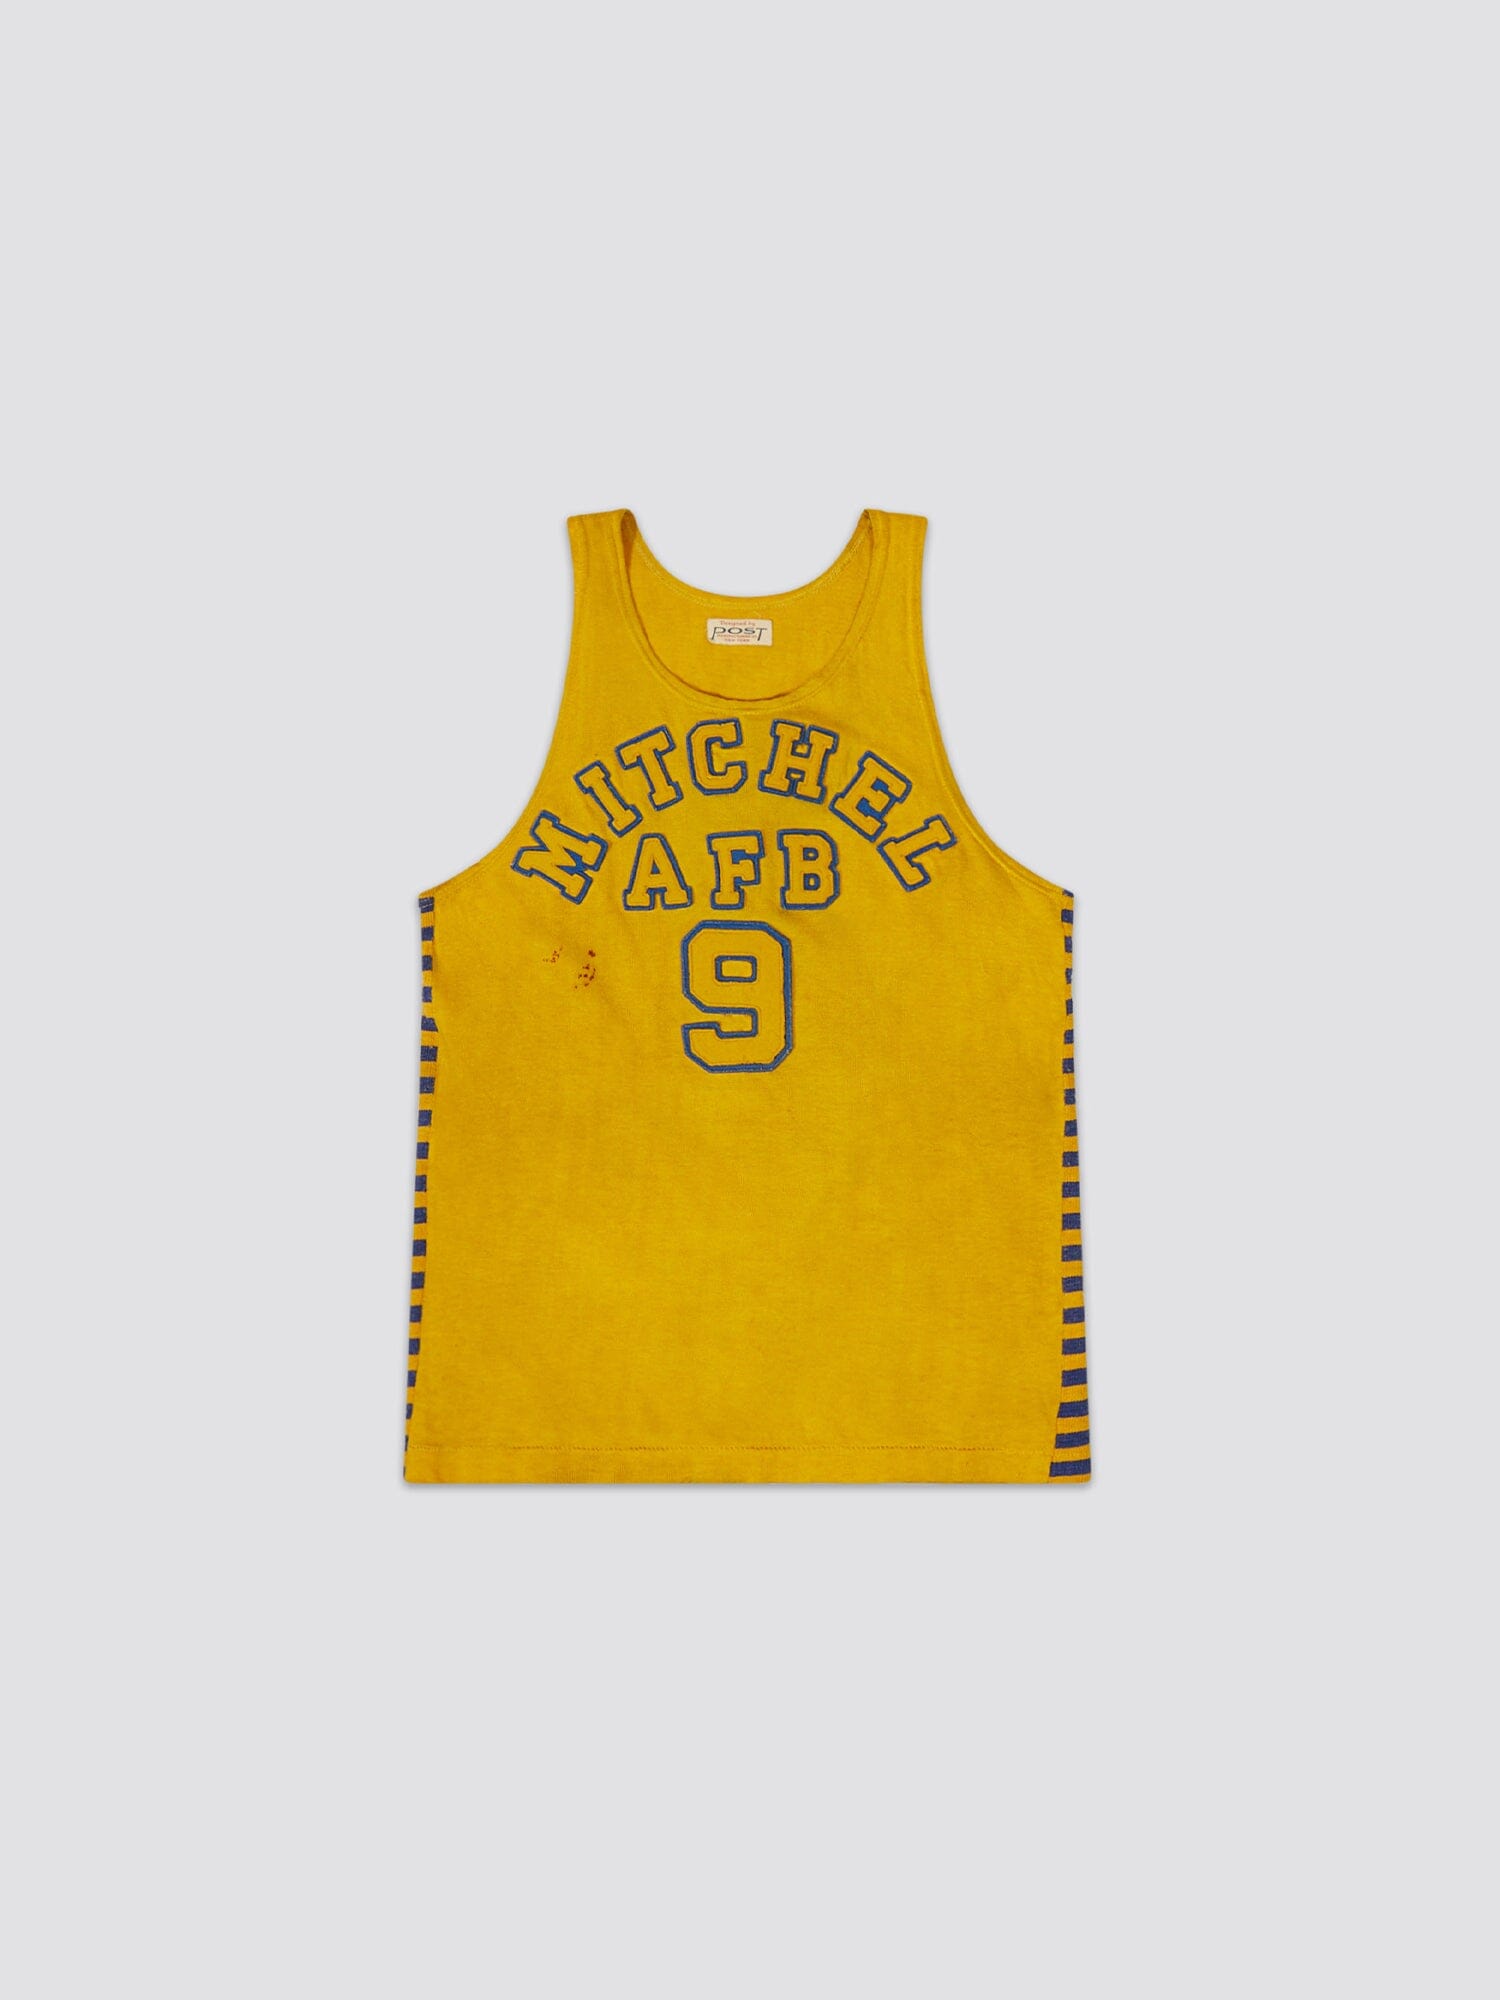 MITCHELL AFB BASKETBALL JERSEY TOP Alpha Industries YELLOW S 